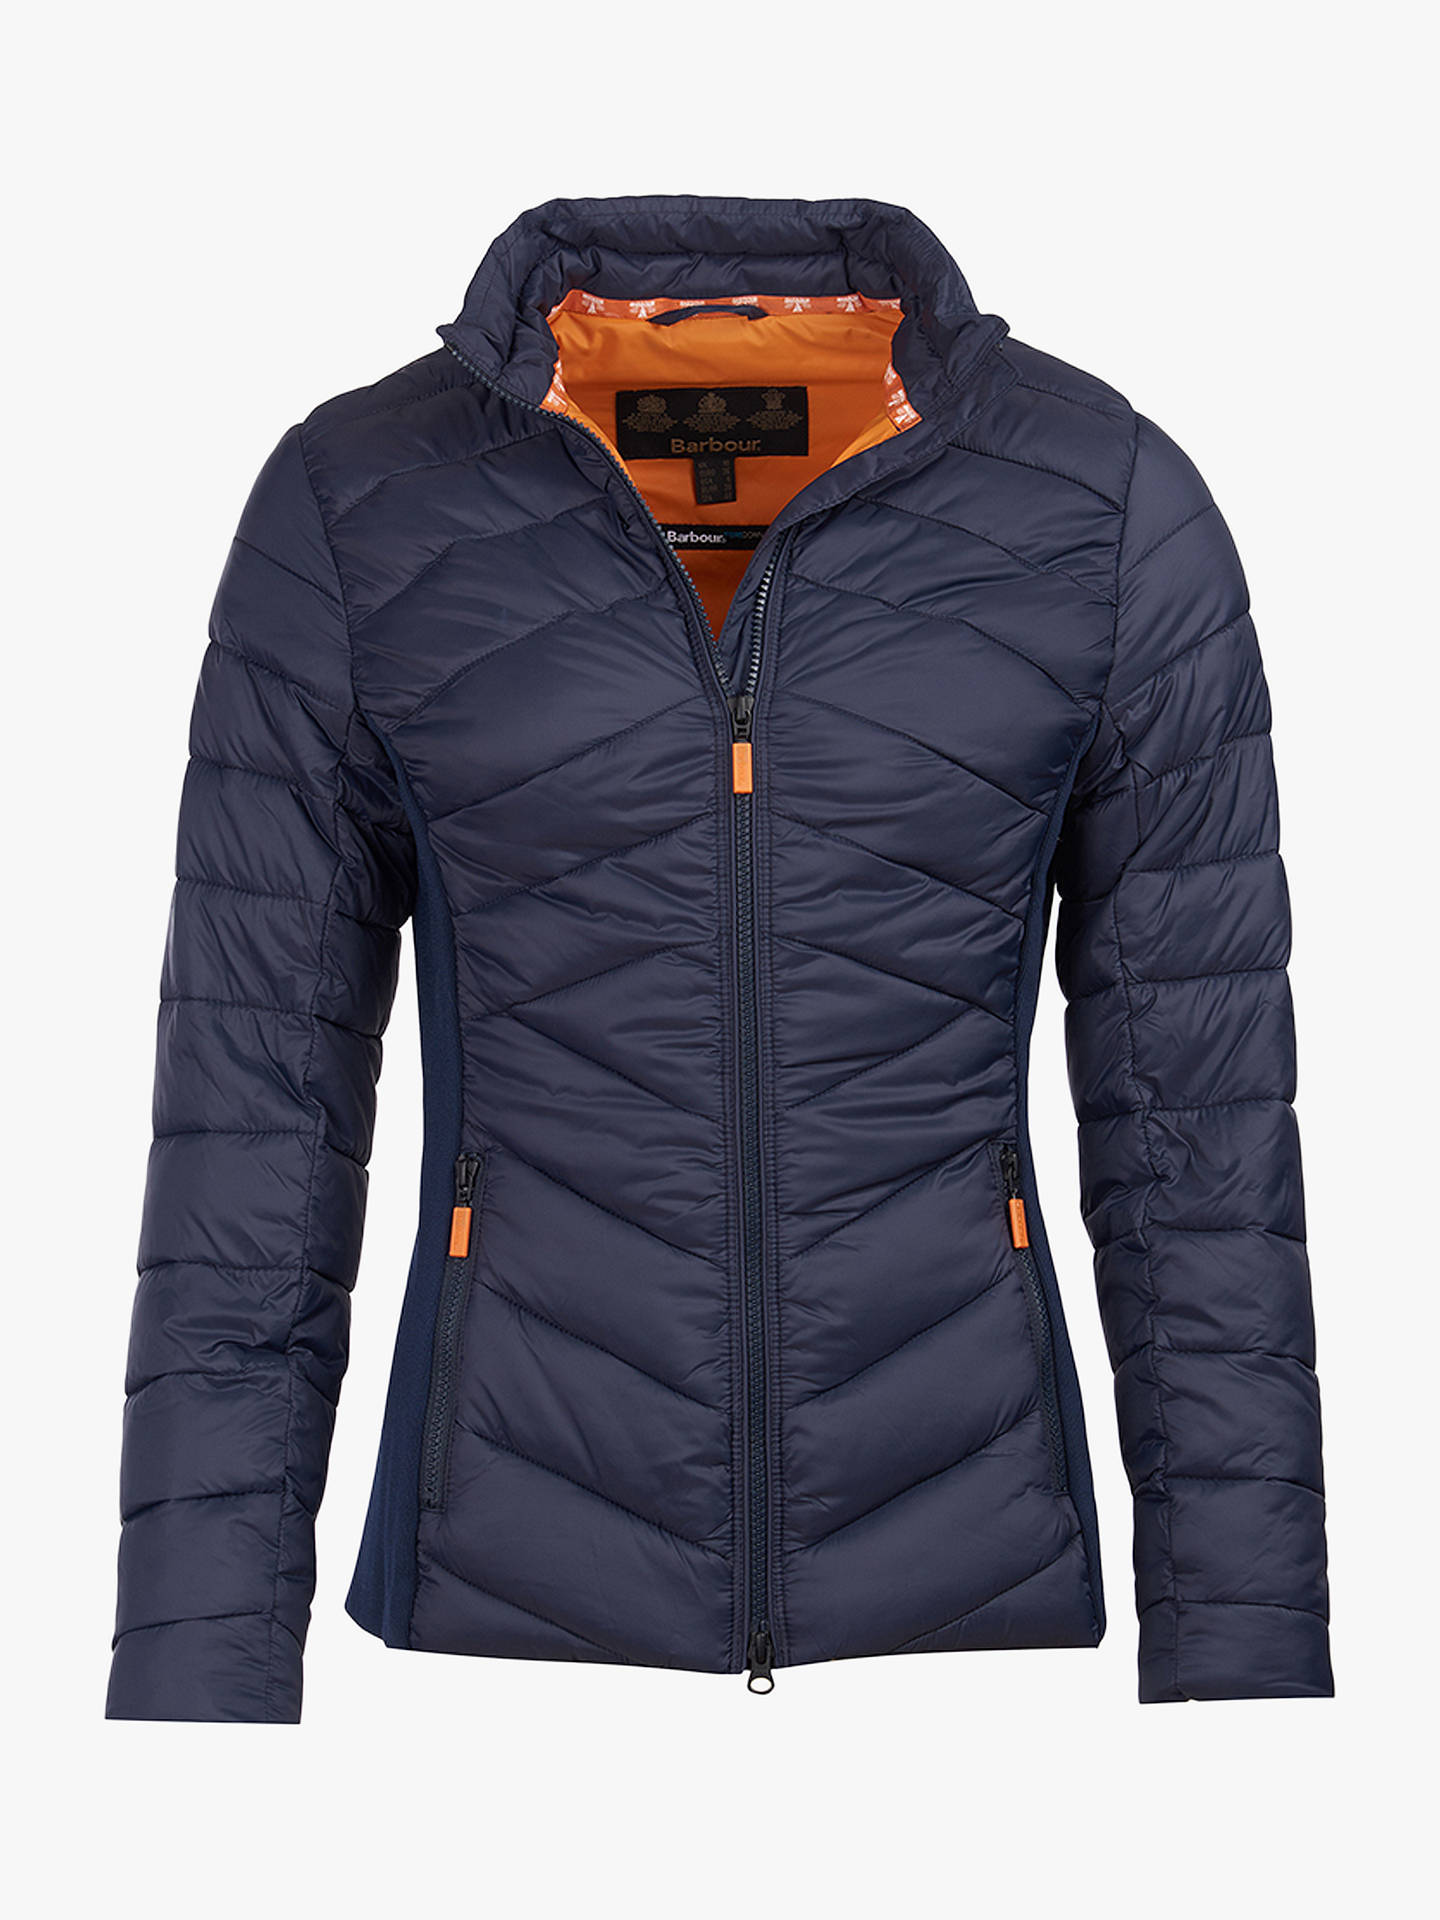 Barbour Longshore quilted navy jacket Kate.jpg